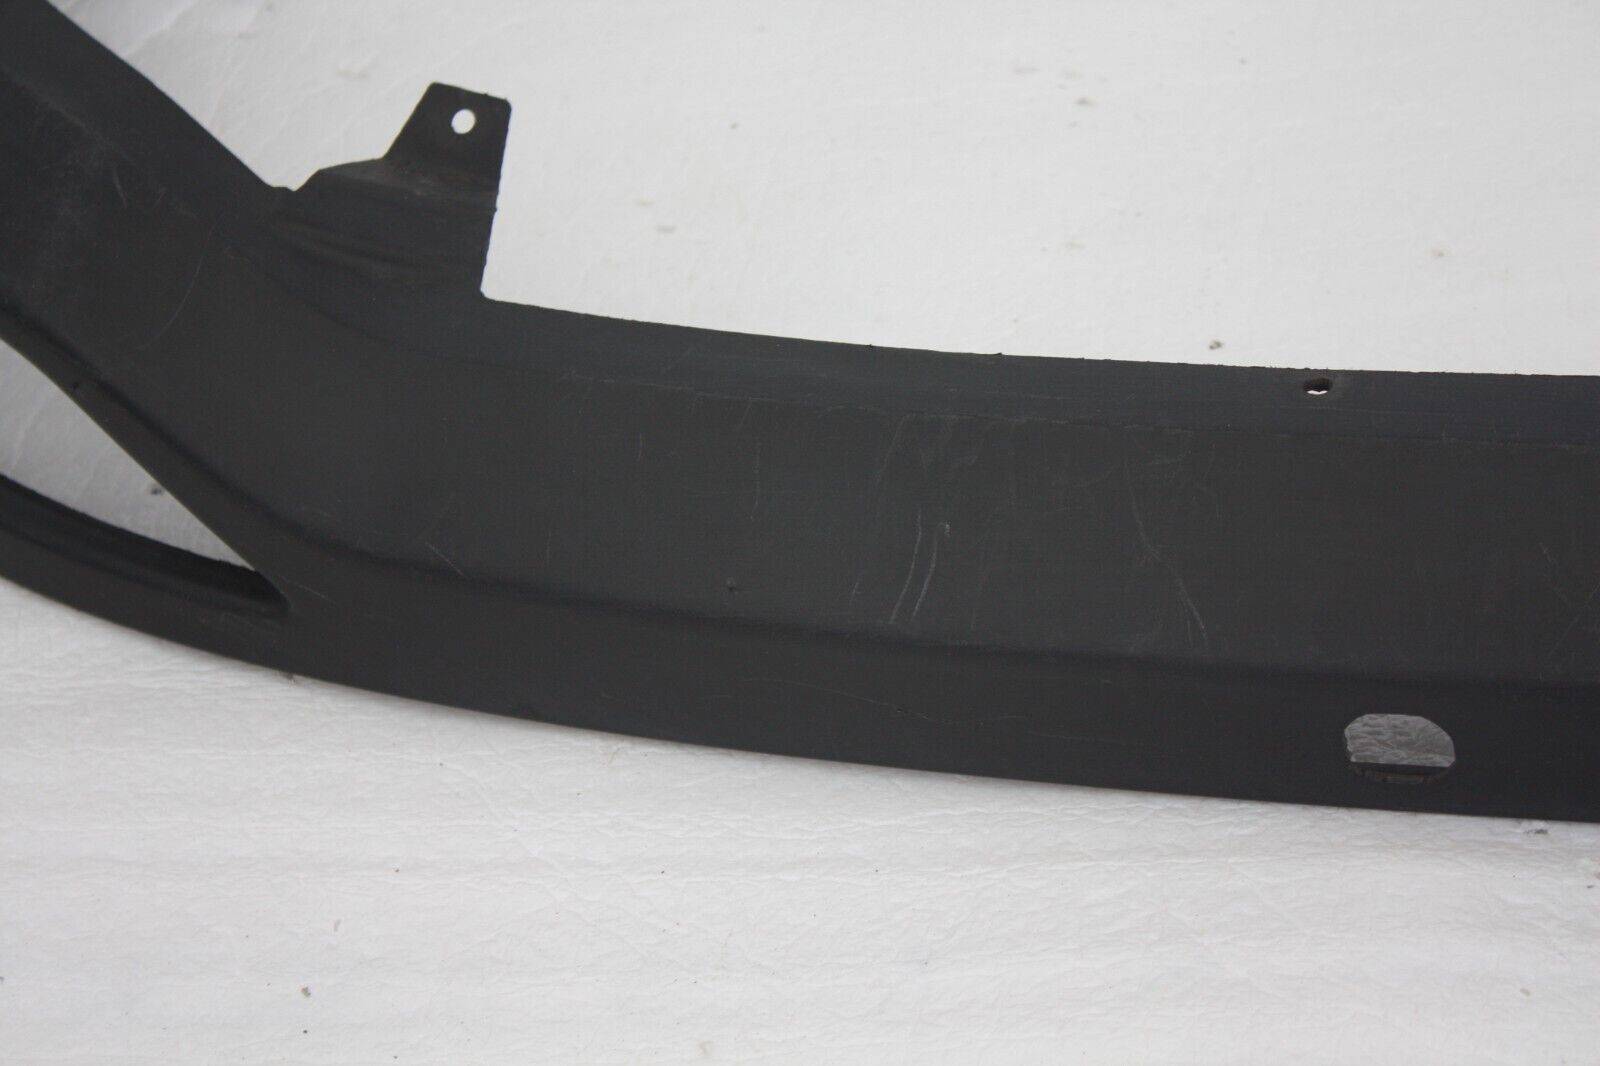 Ford-C-Max-Rear-Bumper-Lower-Section-2010-TO-2015-AM51-R17A894-A-Genuine-176383072477-4